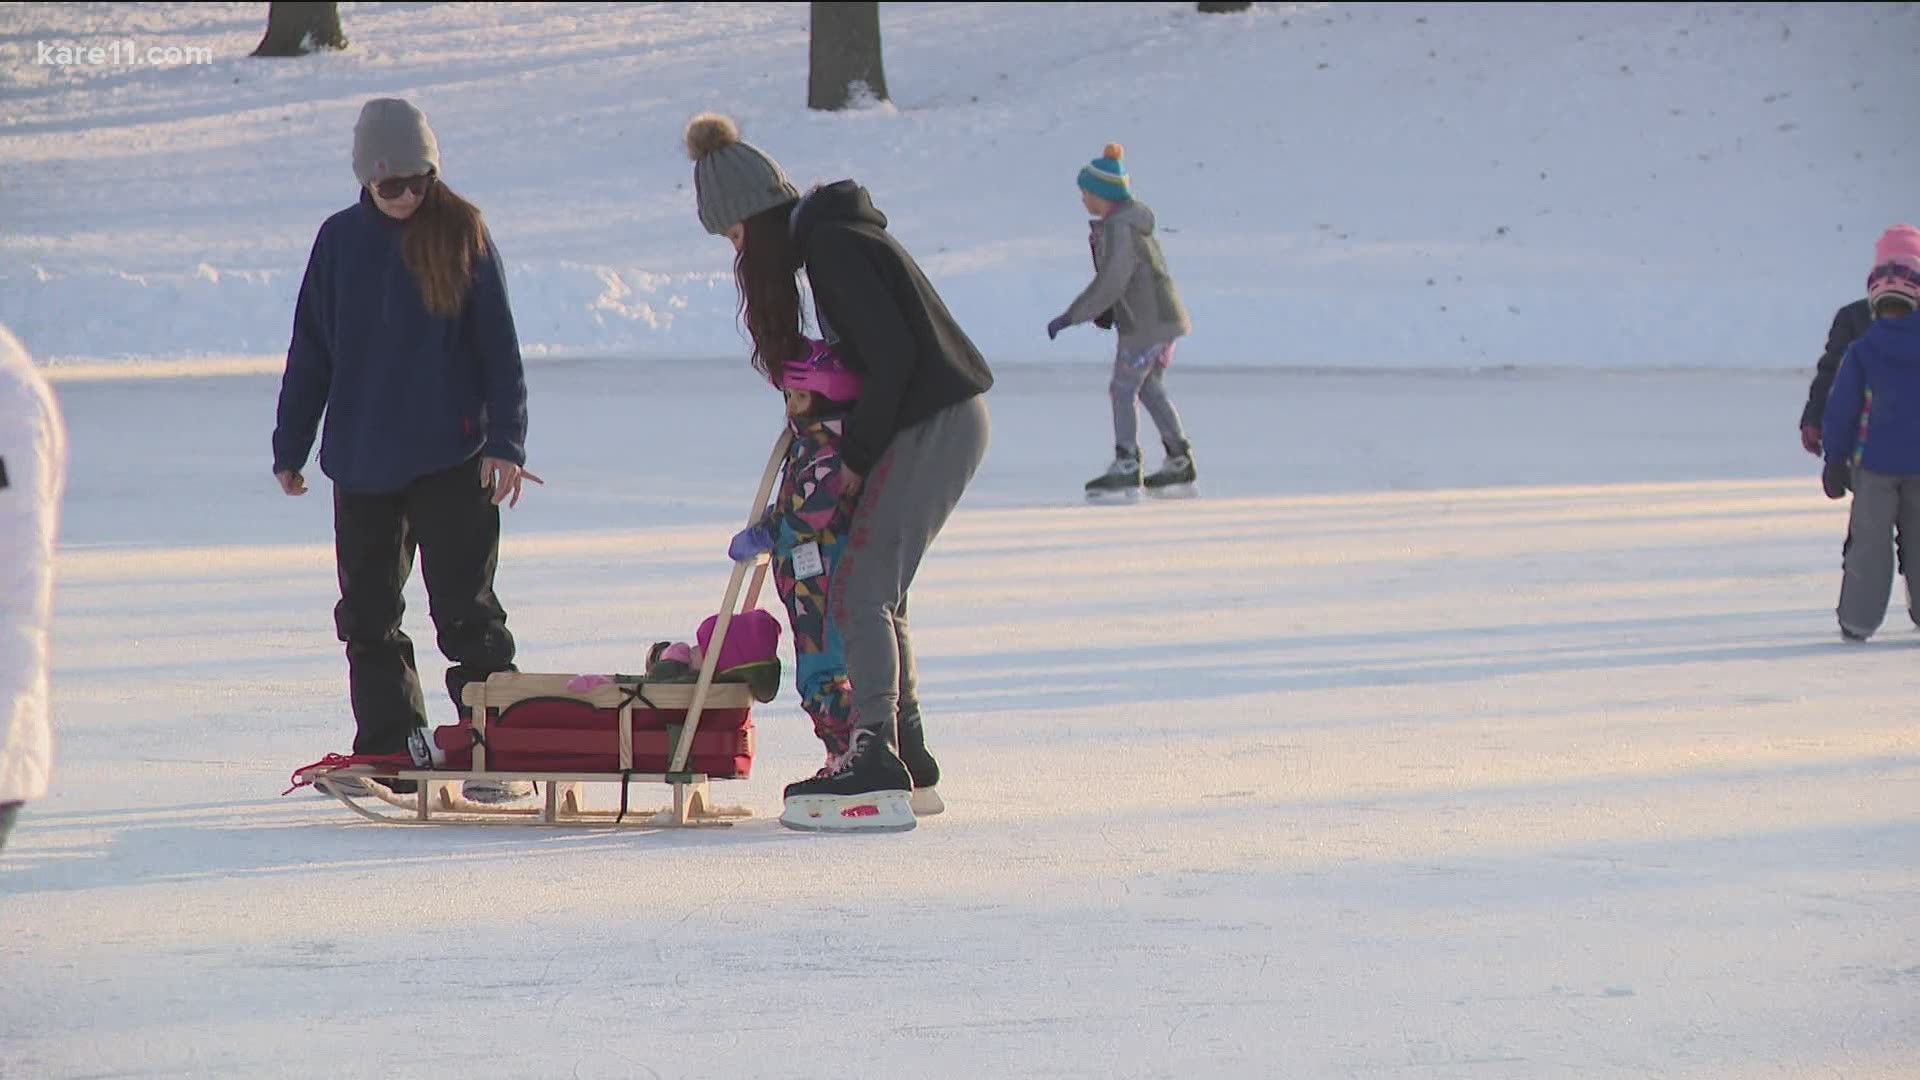 From skating to skiing, many Minnesotans are getting outside more this winter due to the pandemic.